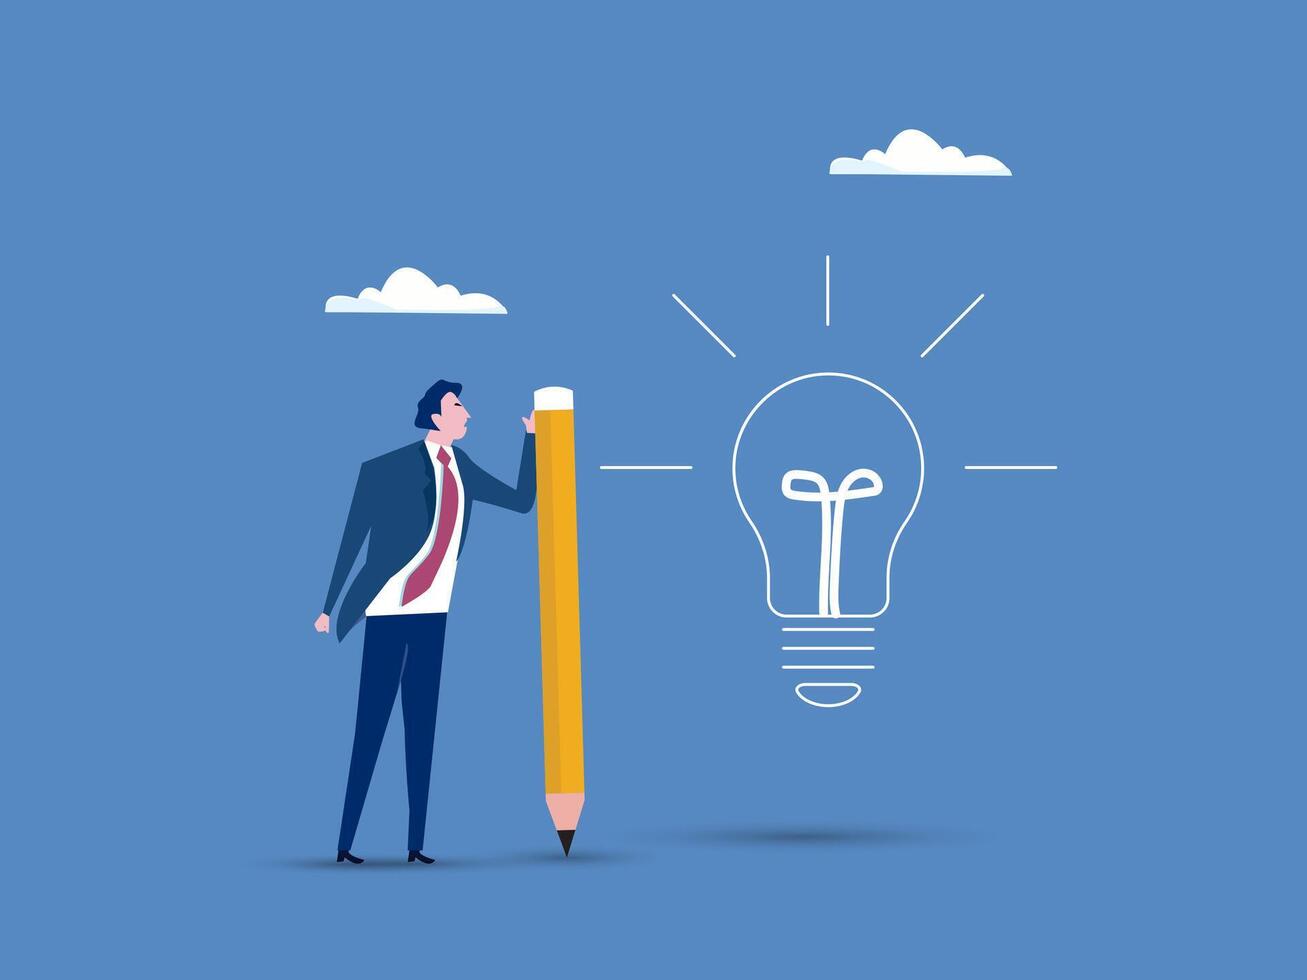 Solving puzzle problem or business idea, innovation or creativity, challenge or thinking process concept, businessman holding pencil connecting dot puzzle as new lightbulb idea. vector